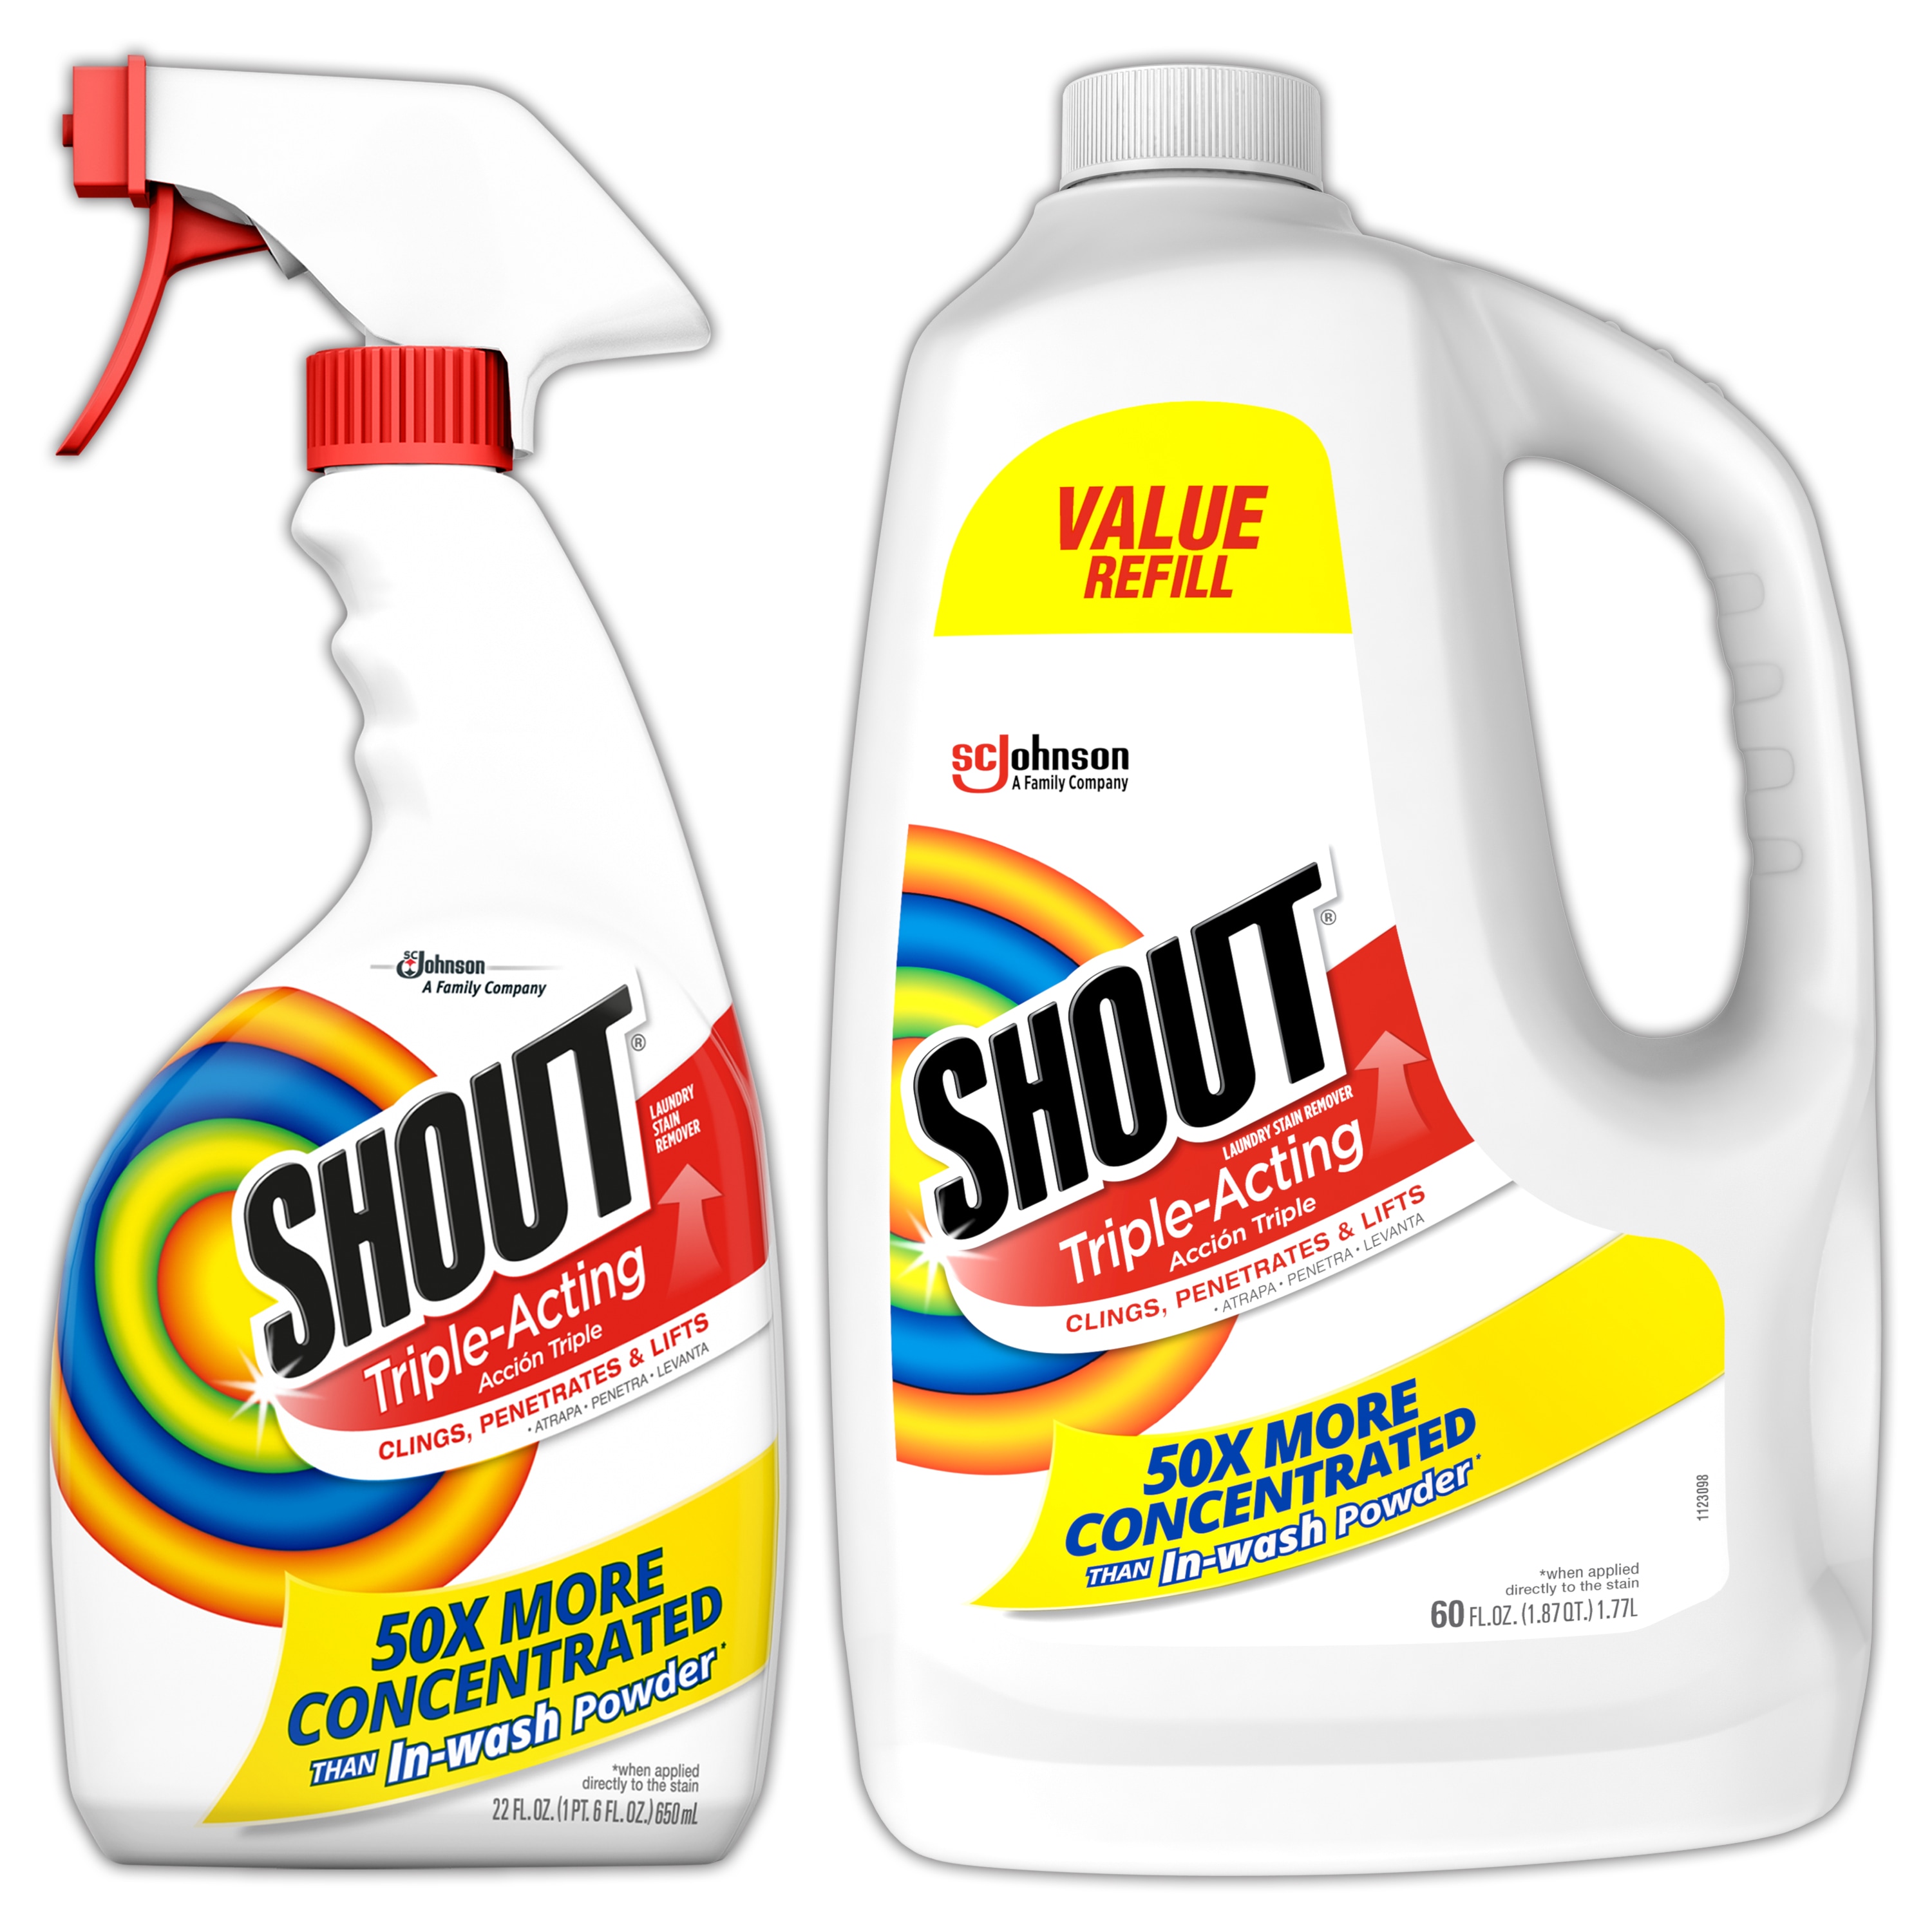 Shout® Laundry Stain Remover Spray, 650mL, 650mL 